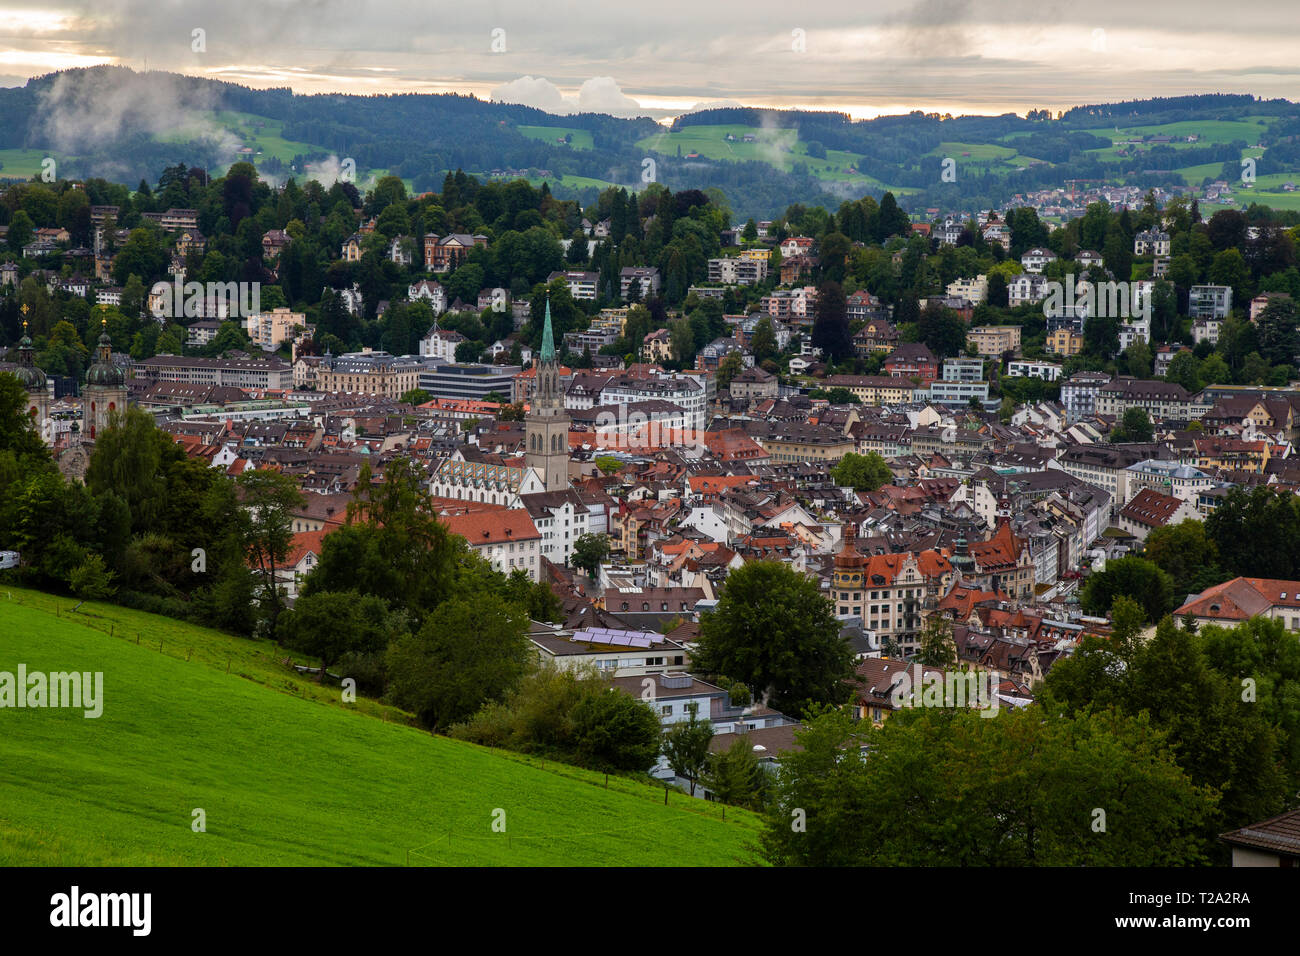 General map of the beautiful Swiss city of St Gallen. St. Gallen or traditionally is a Swiss town and the capital of the canton of St. Gallen. It evol Stock Photo